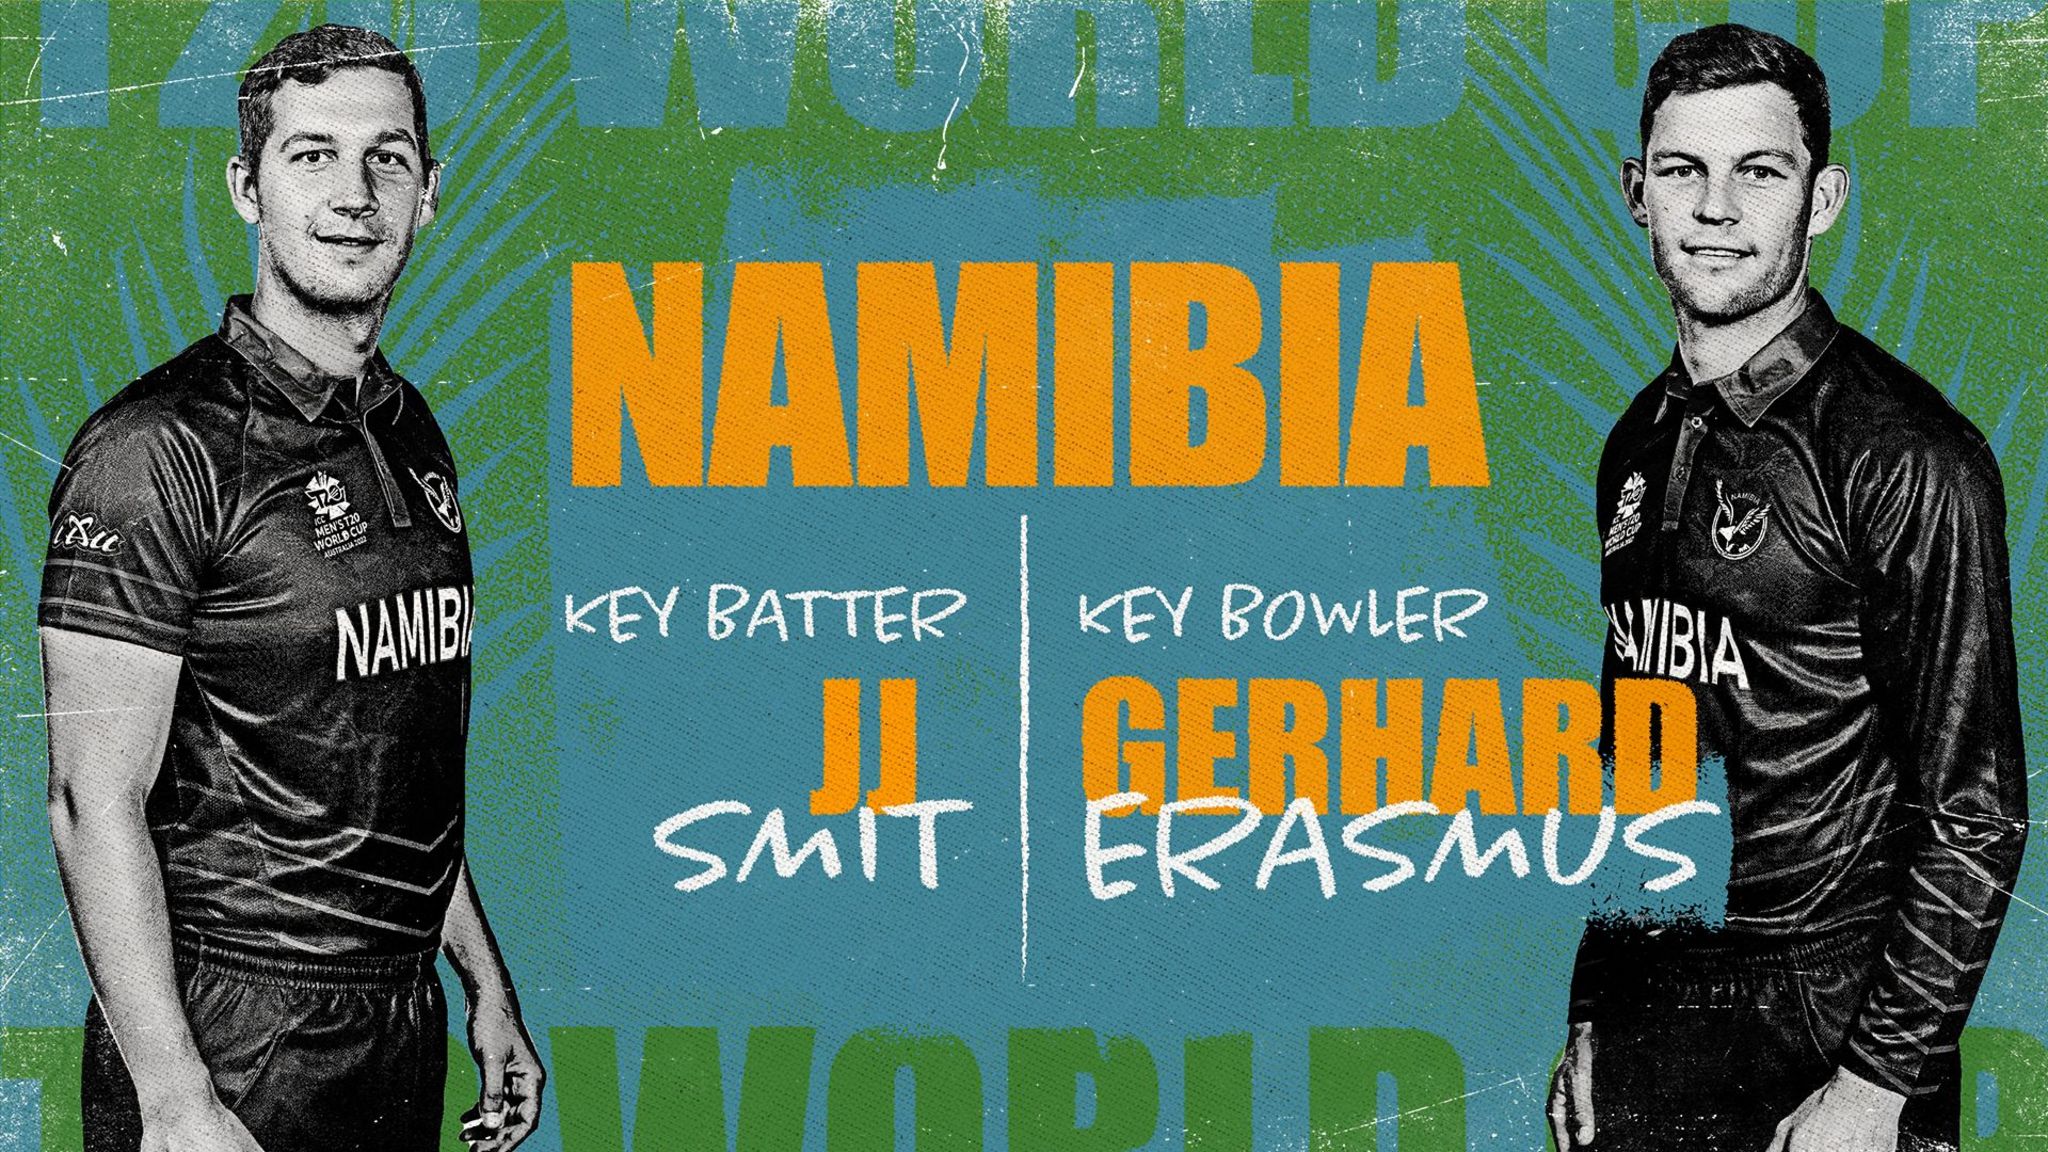 A graphic showing JJ Smit and Gerhard Erasmus as Namibia's key batter and bowler at the Men's T20 World Cup